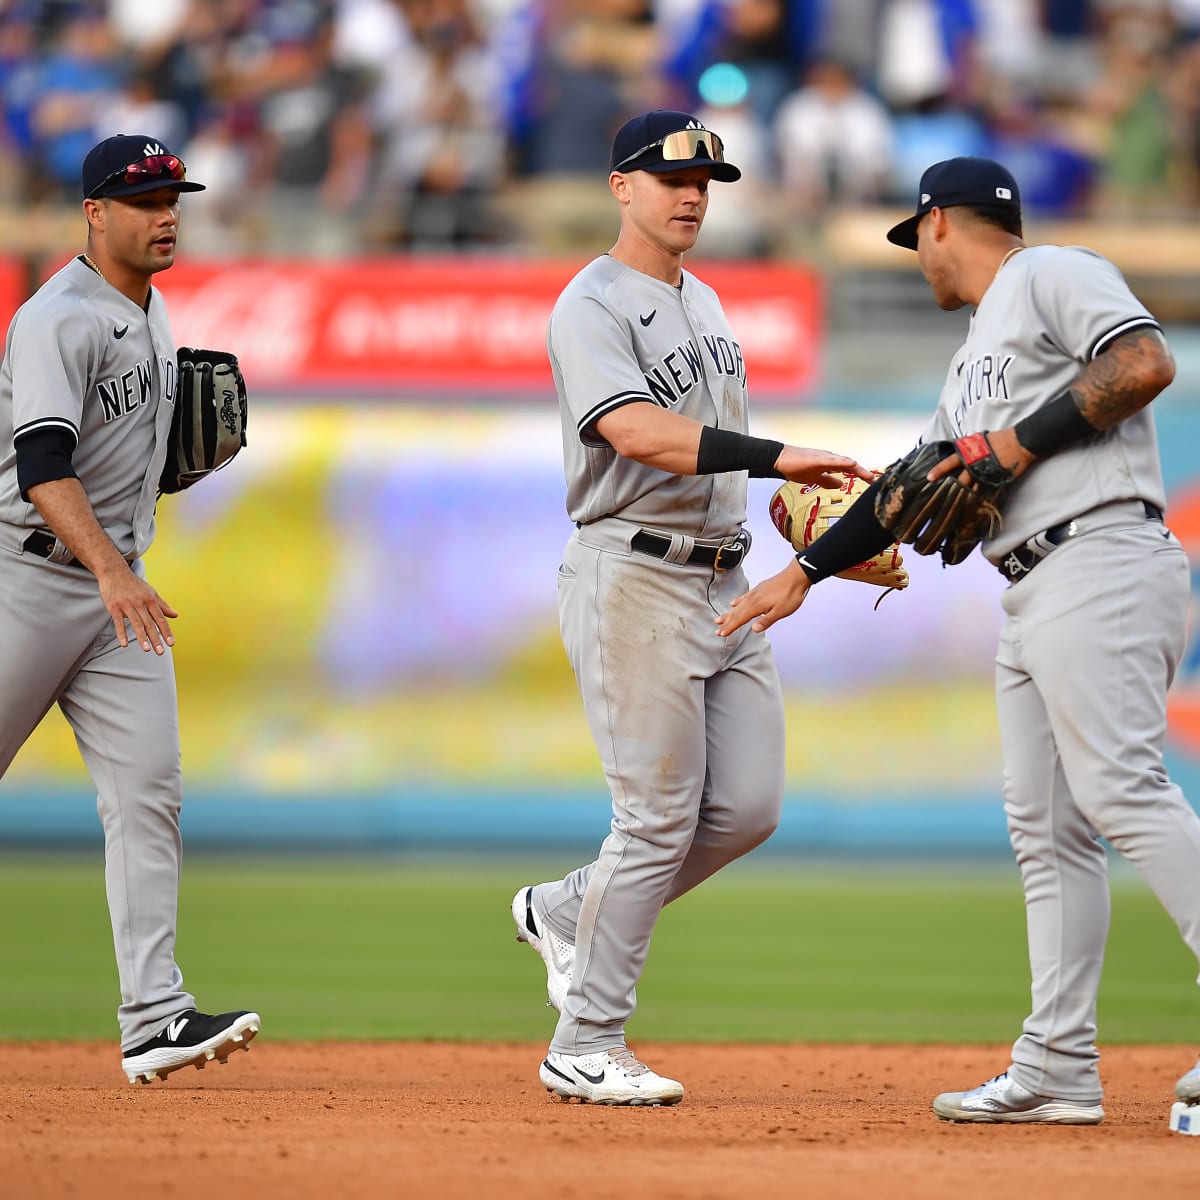 Yankees offense still broken after 1st road trip with new hitting